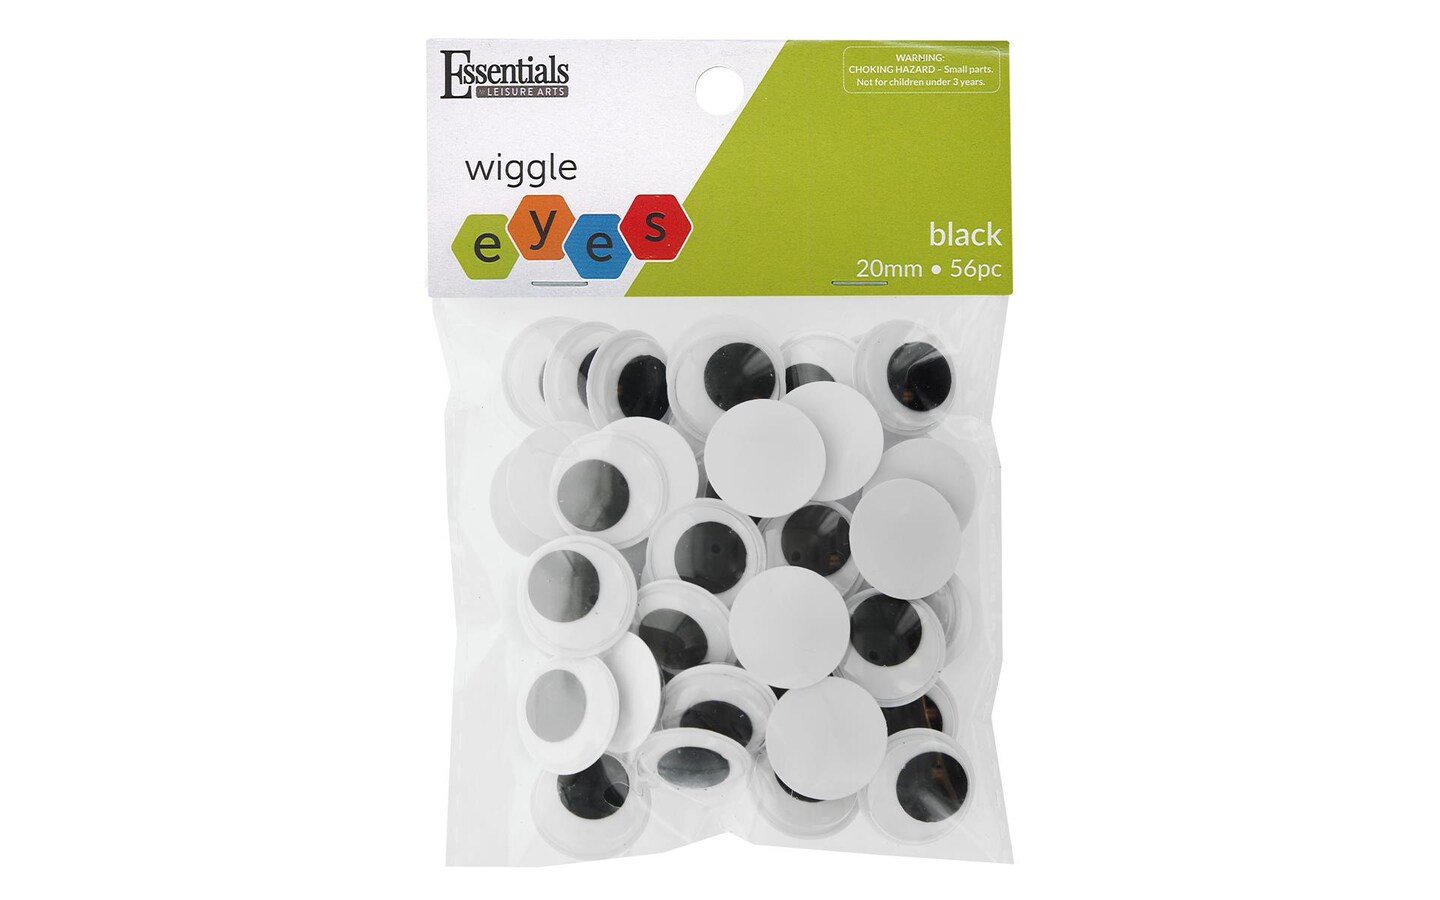 Googly Eyes for Crafts, Black and White Craft Eyes, Googly Eyes for Crafting,  Googly Eyes, Eyes for Crafts, Crafting Eyes 